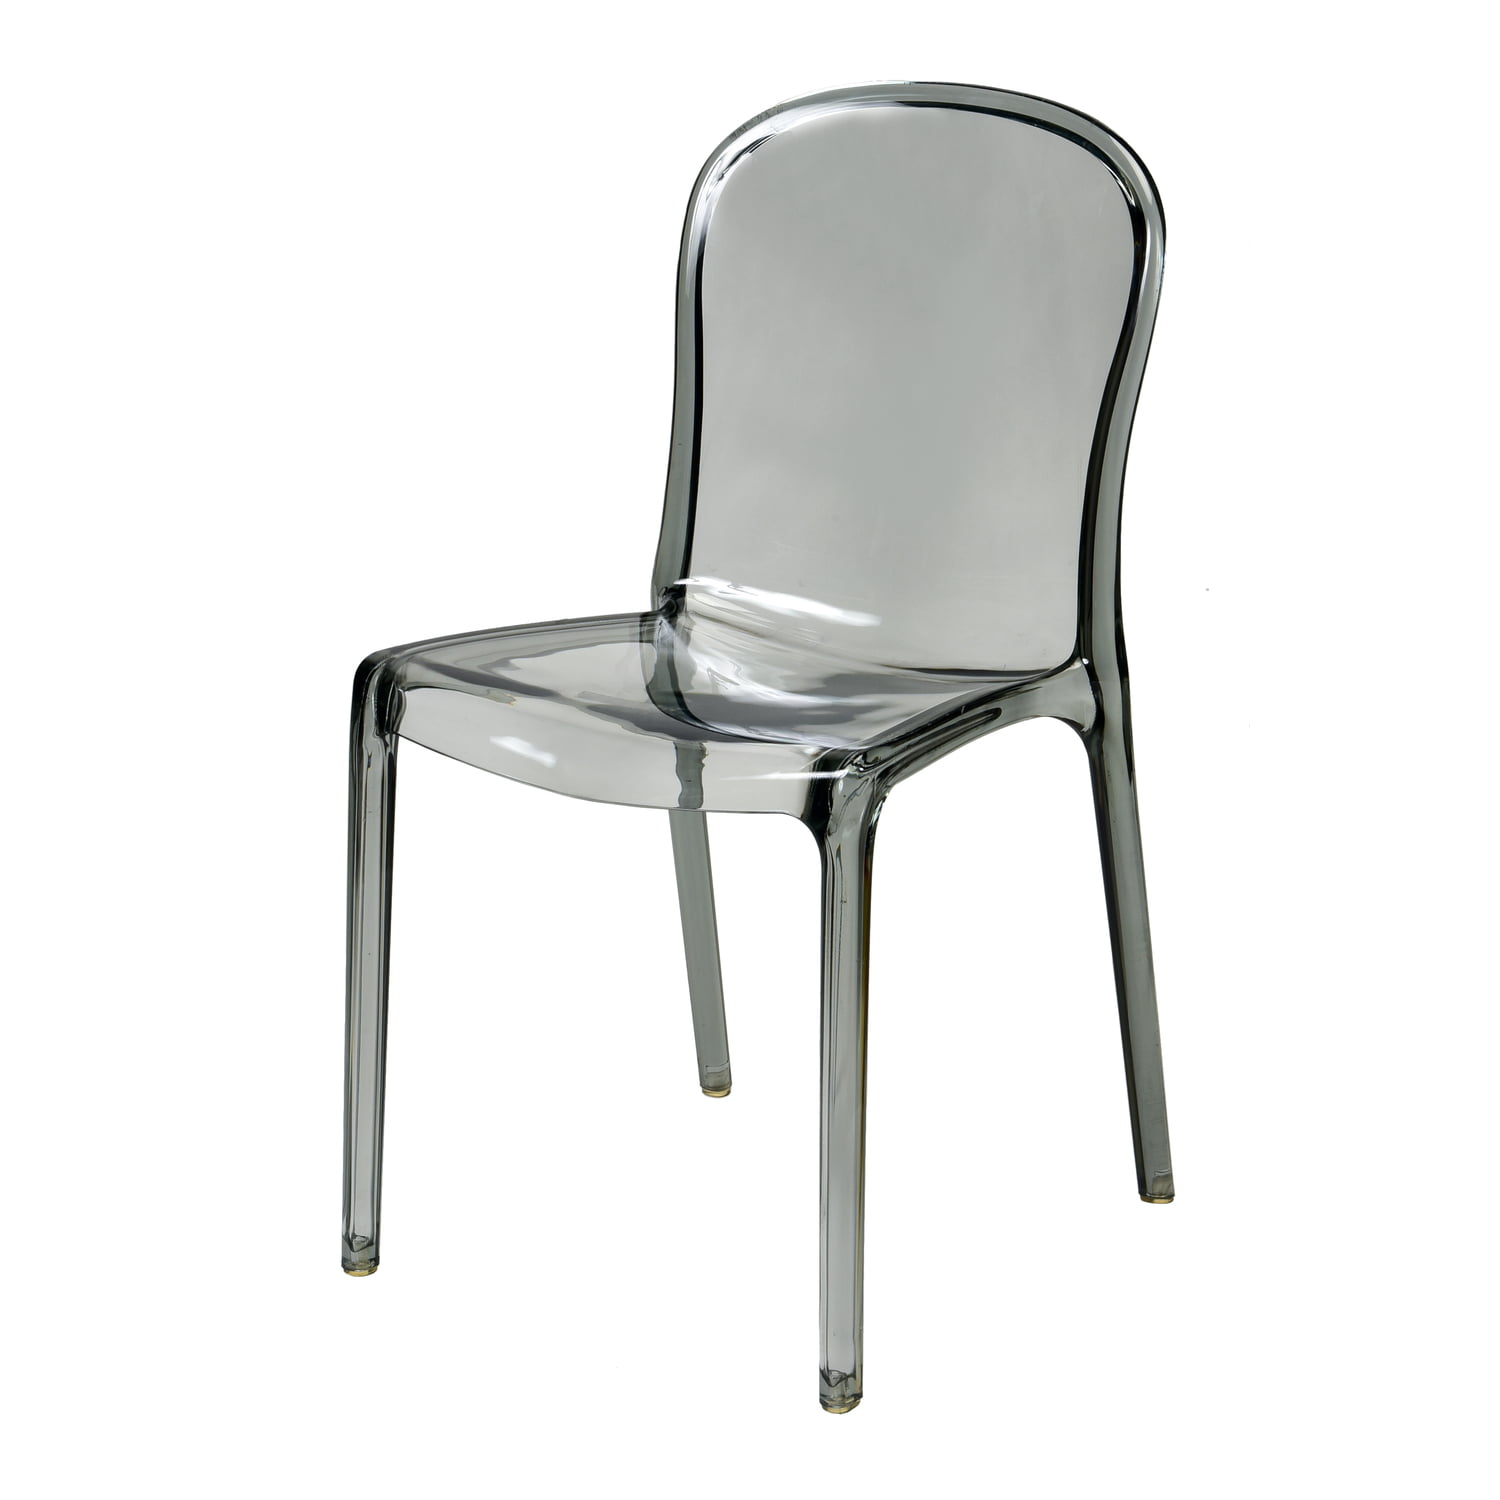 Rpc-genoa-sg-4 Genoa Polycarbonate Dining Chair, Smoke Grey - 33 In. - Set Of 4